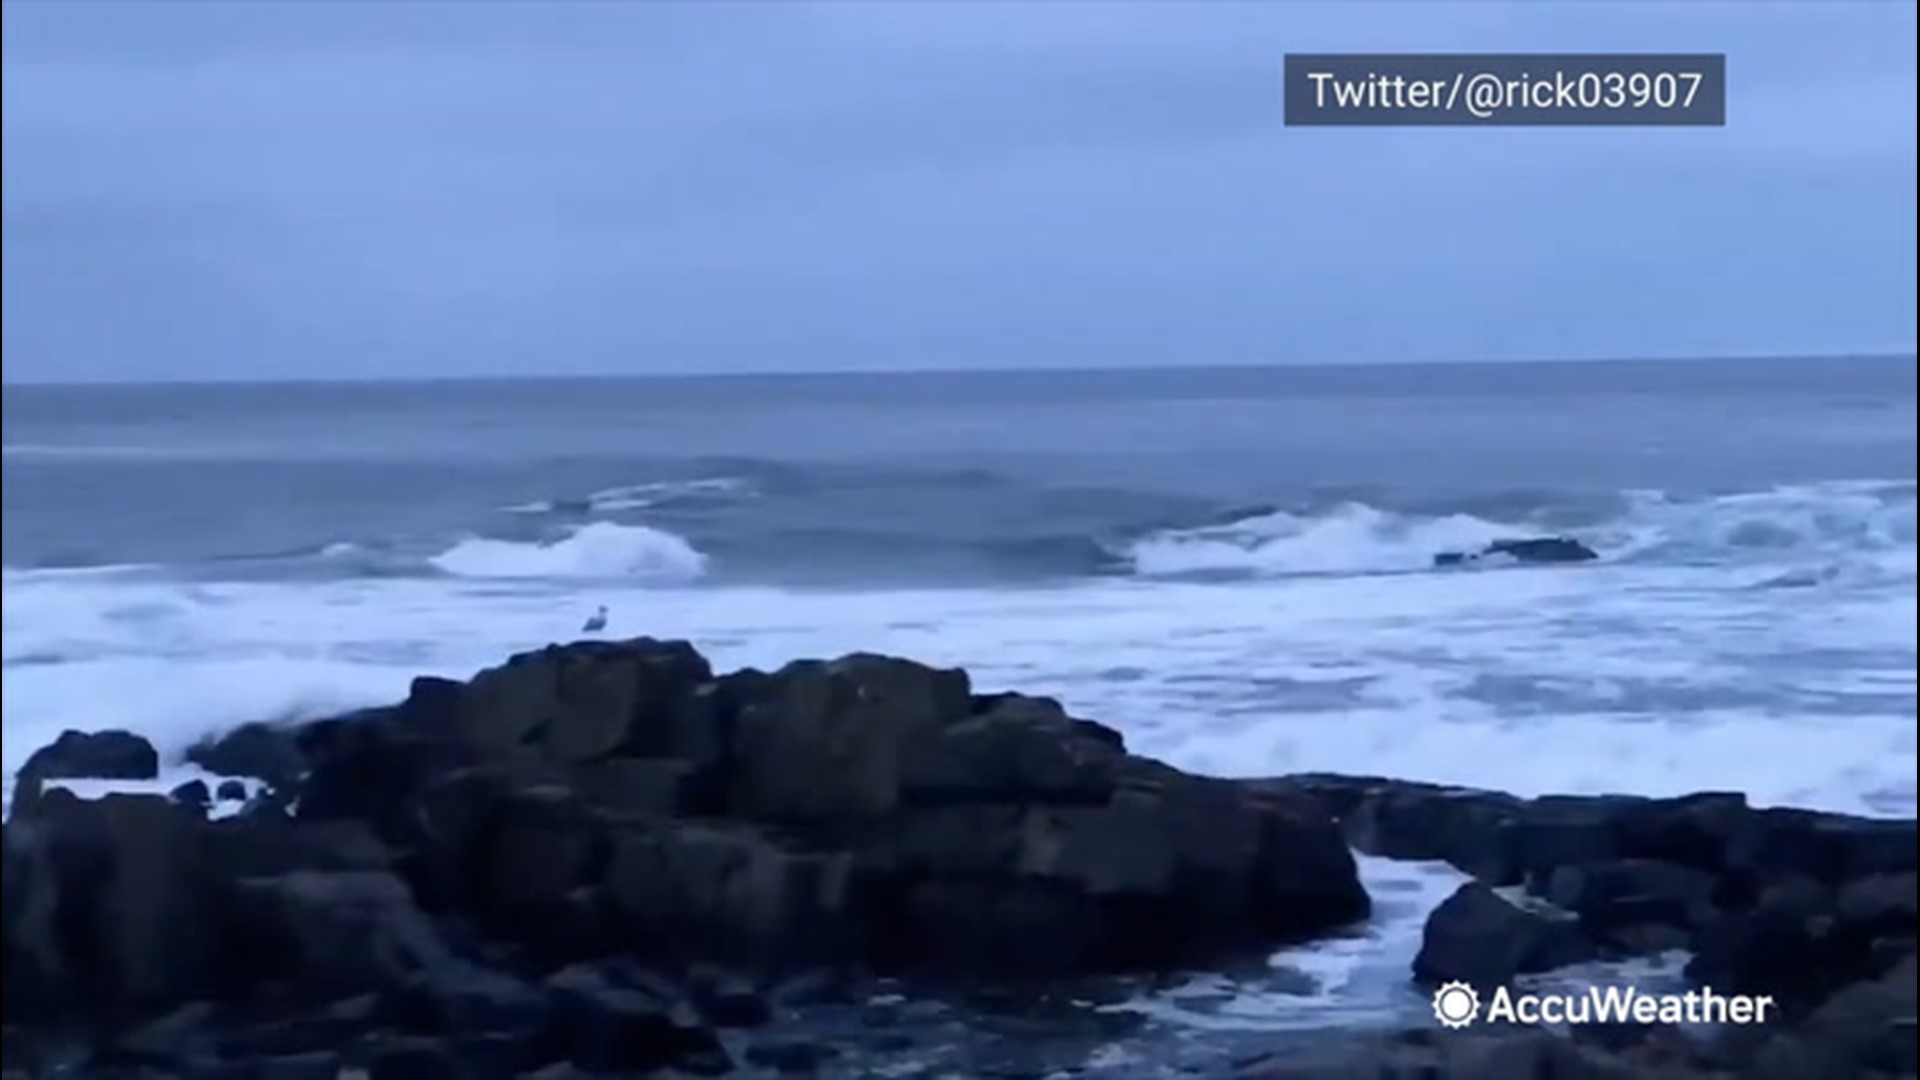 On Oct. 23, foamy waves crashed against the rocky shores of Ogunquit, Maine, as a strong wind blew through.